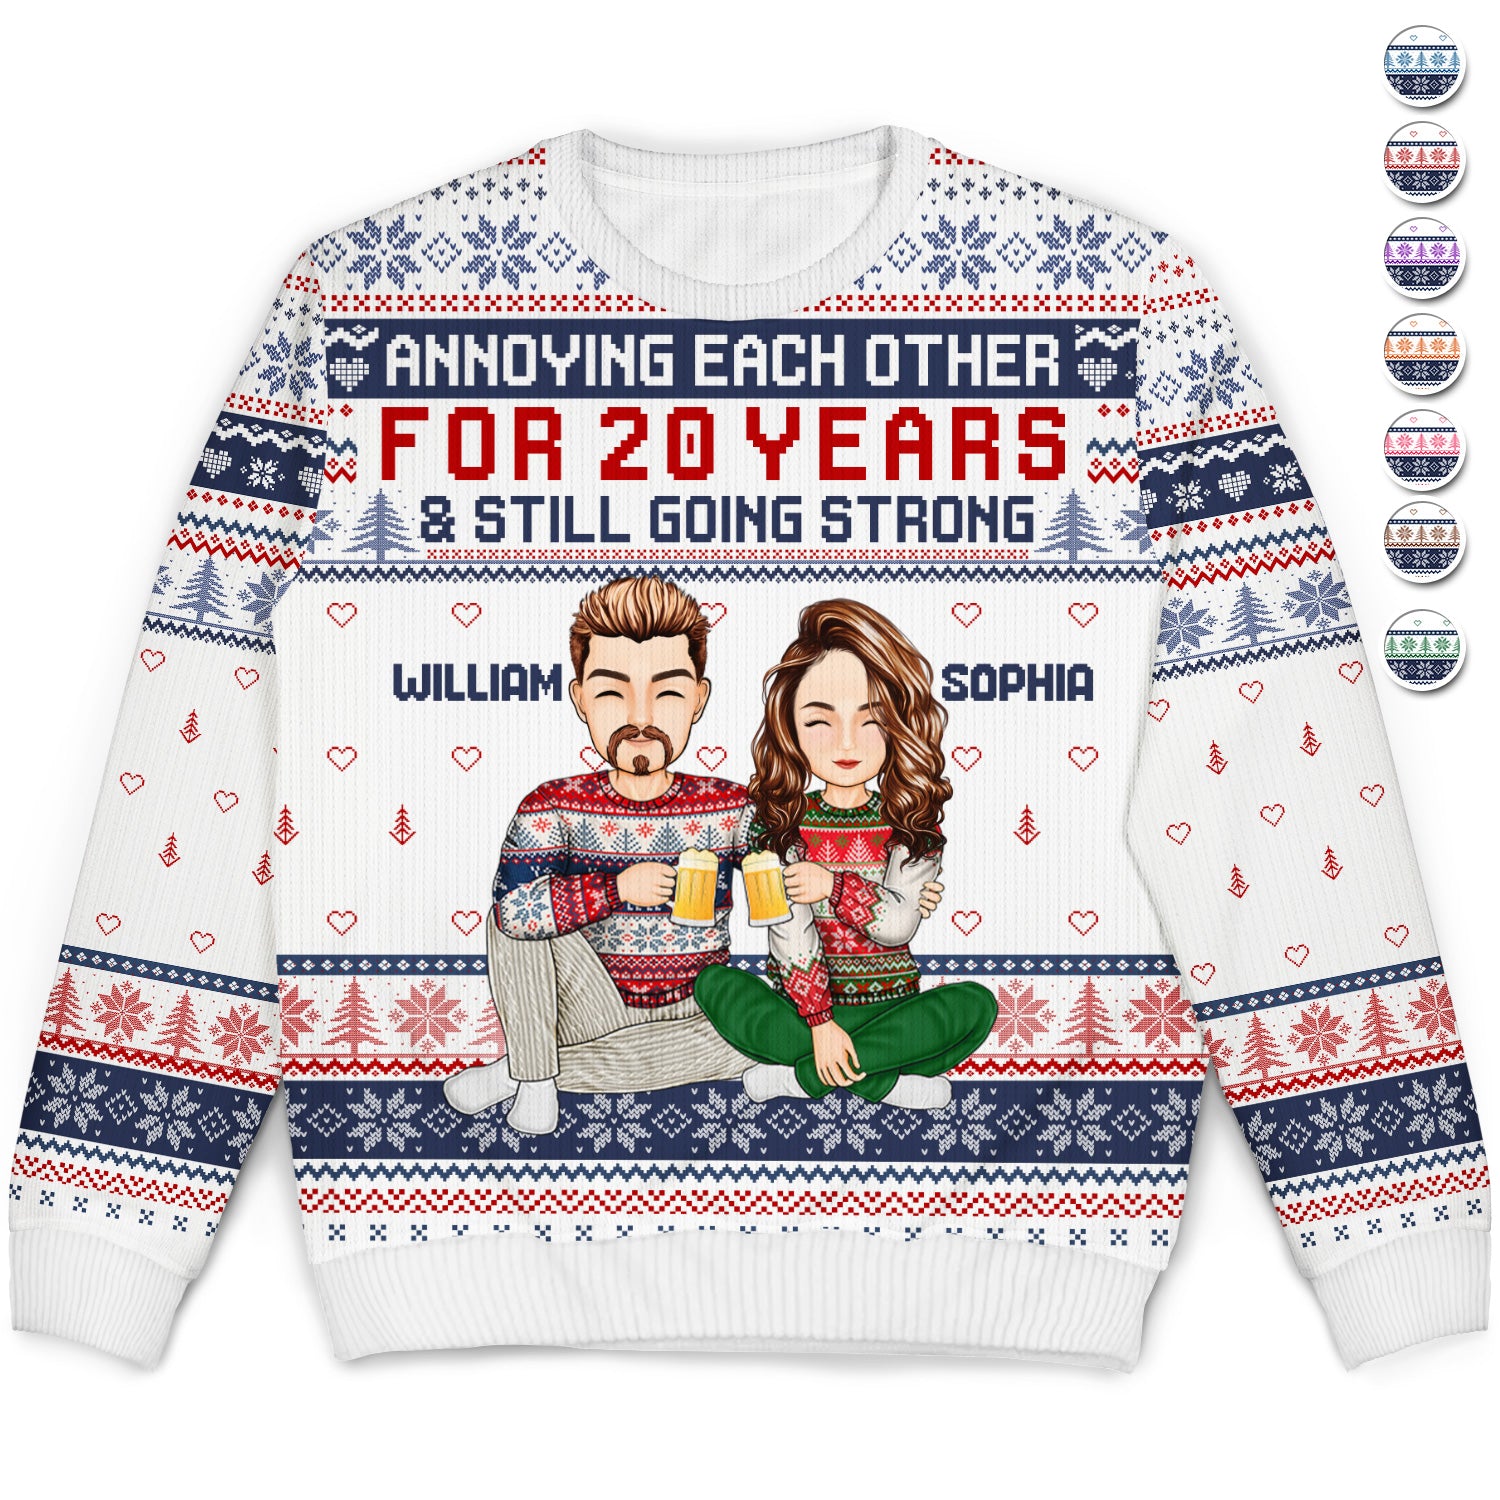 Annoying Each Other For And Still Going Strong - Christmas Gift For Couple, Spouse, Husband, Wife - Personalized Unisex Ugly Sweater